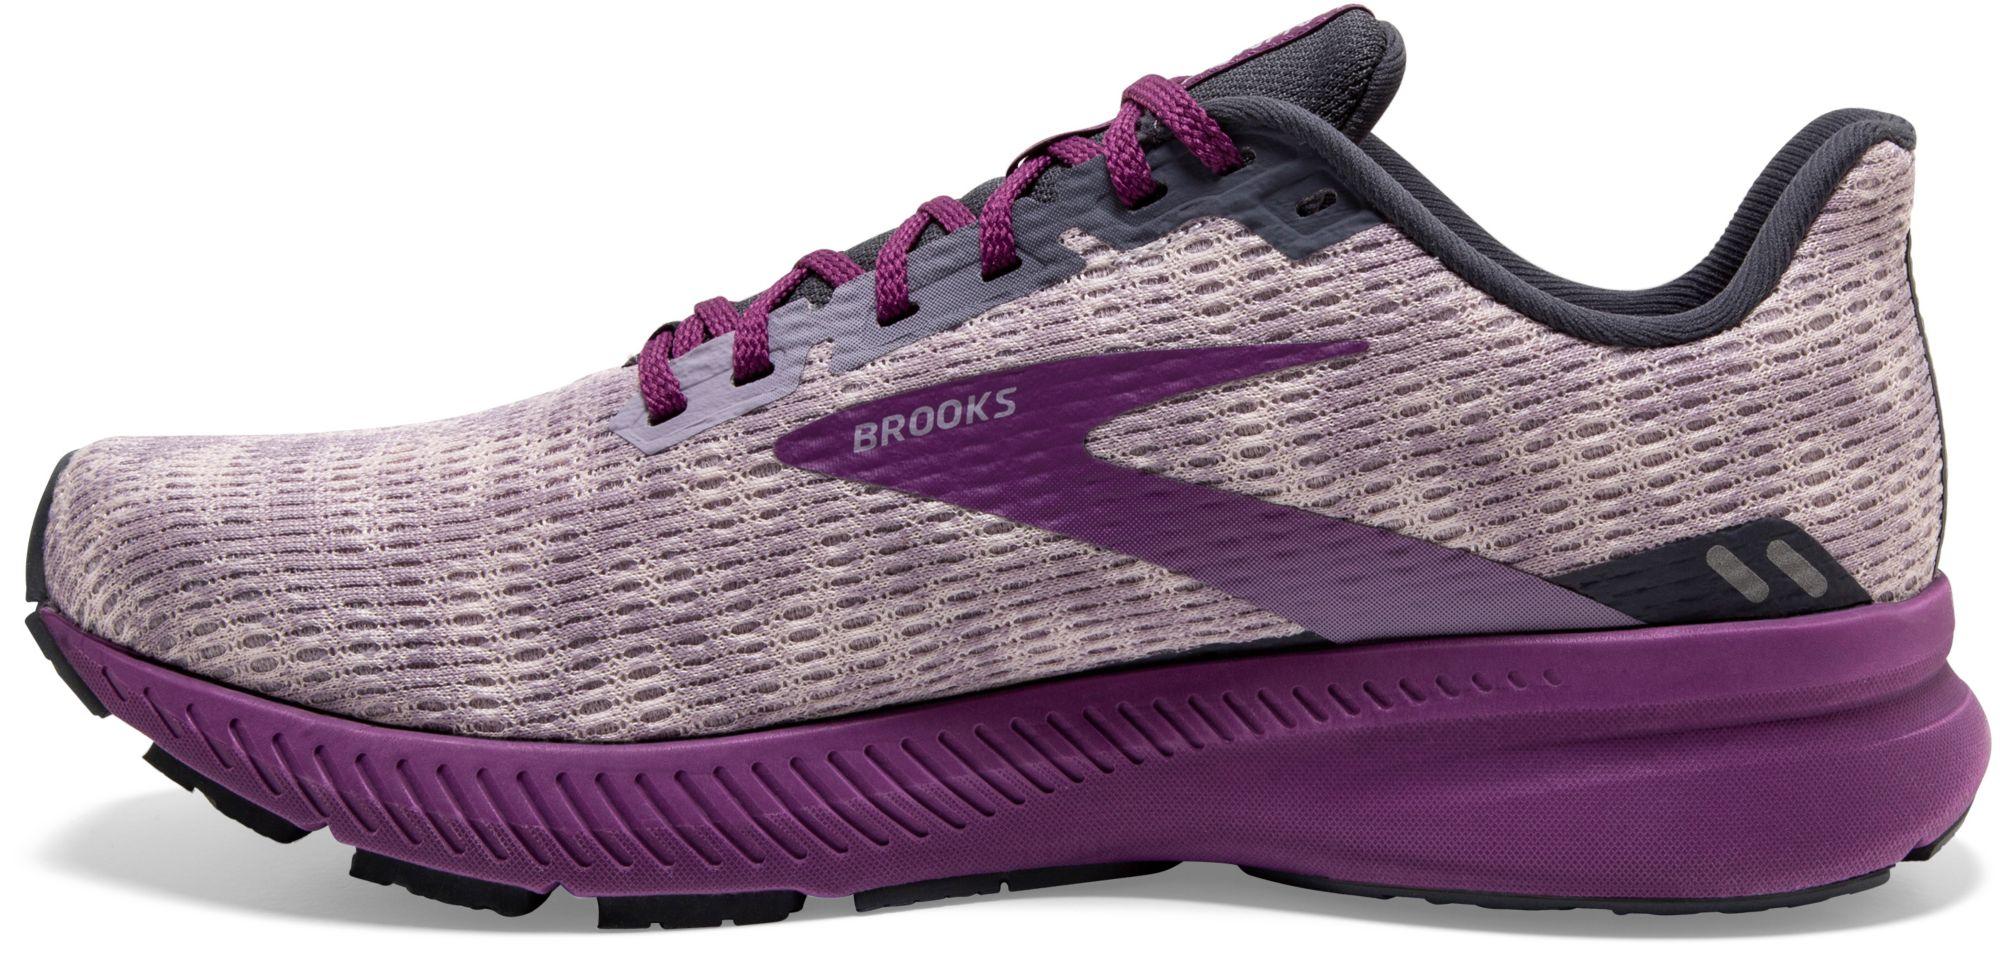 Brooks Rubber Launch 8 Running Shoes in Violet (Purple) - Lyst